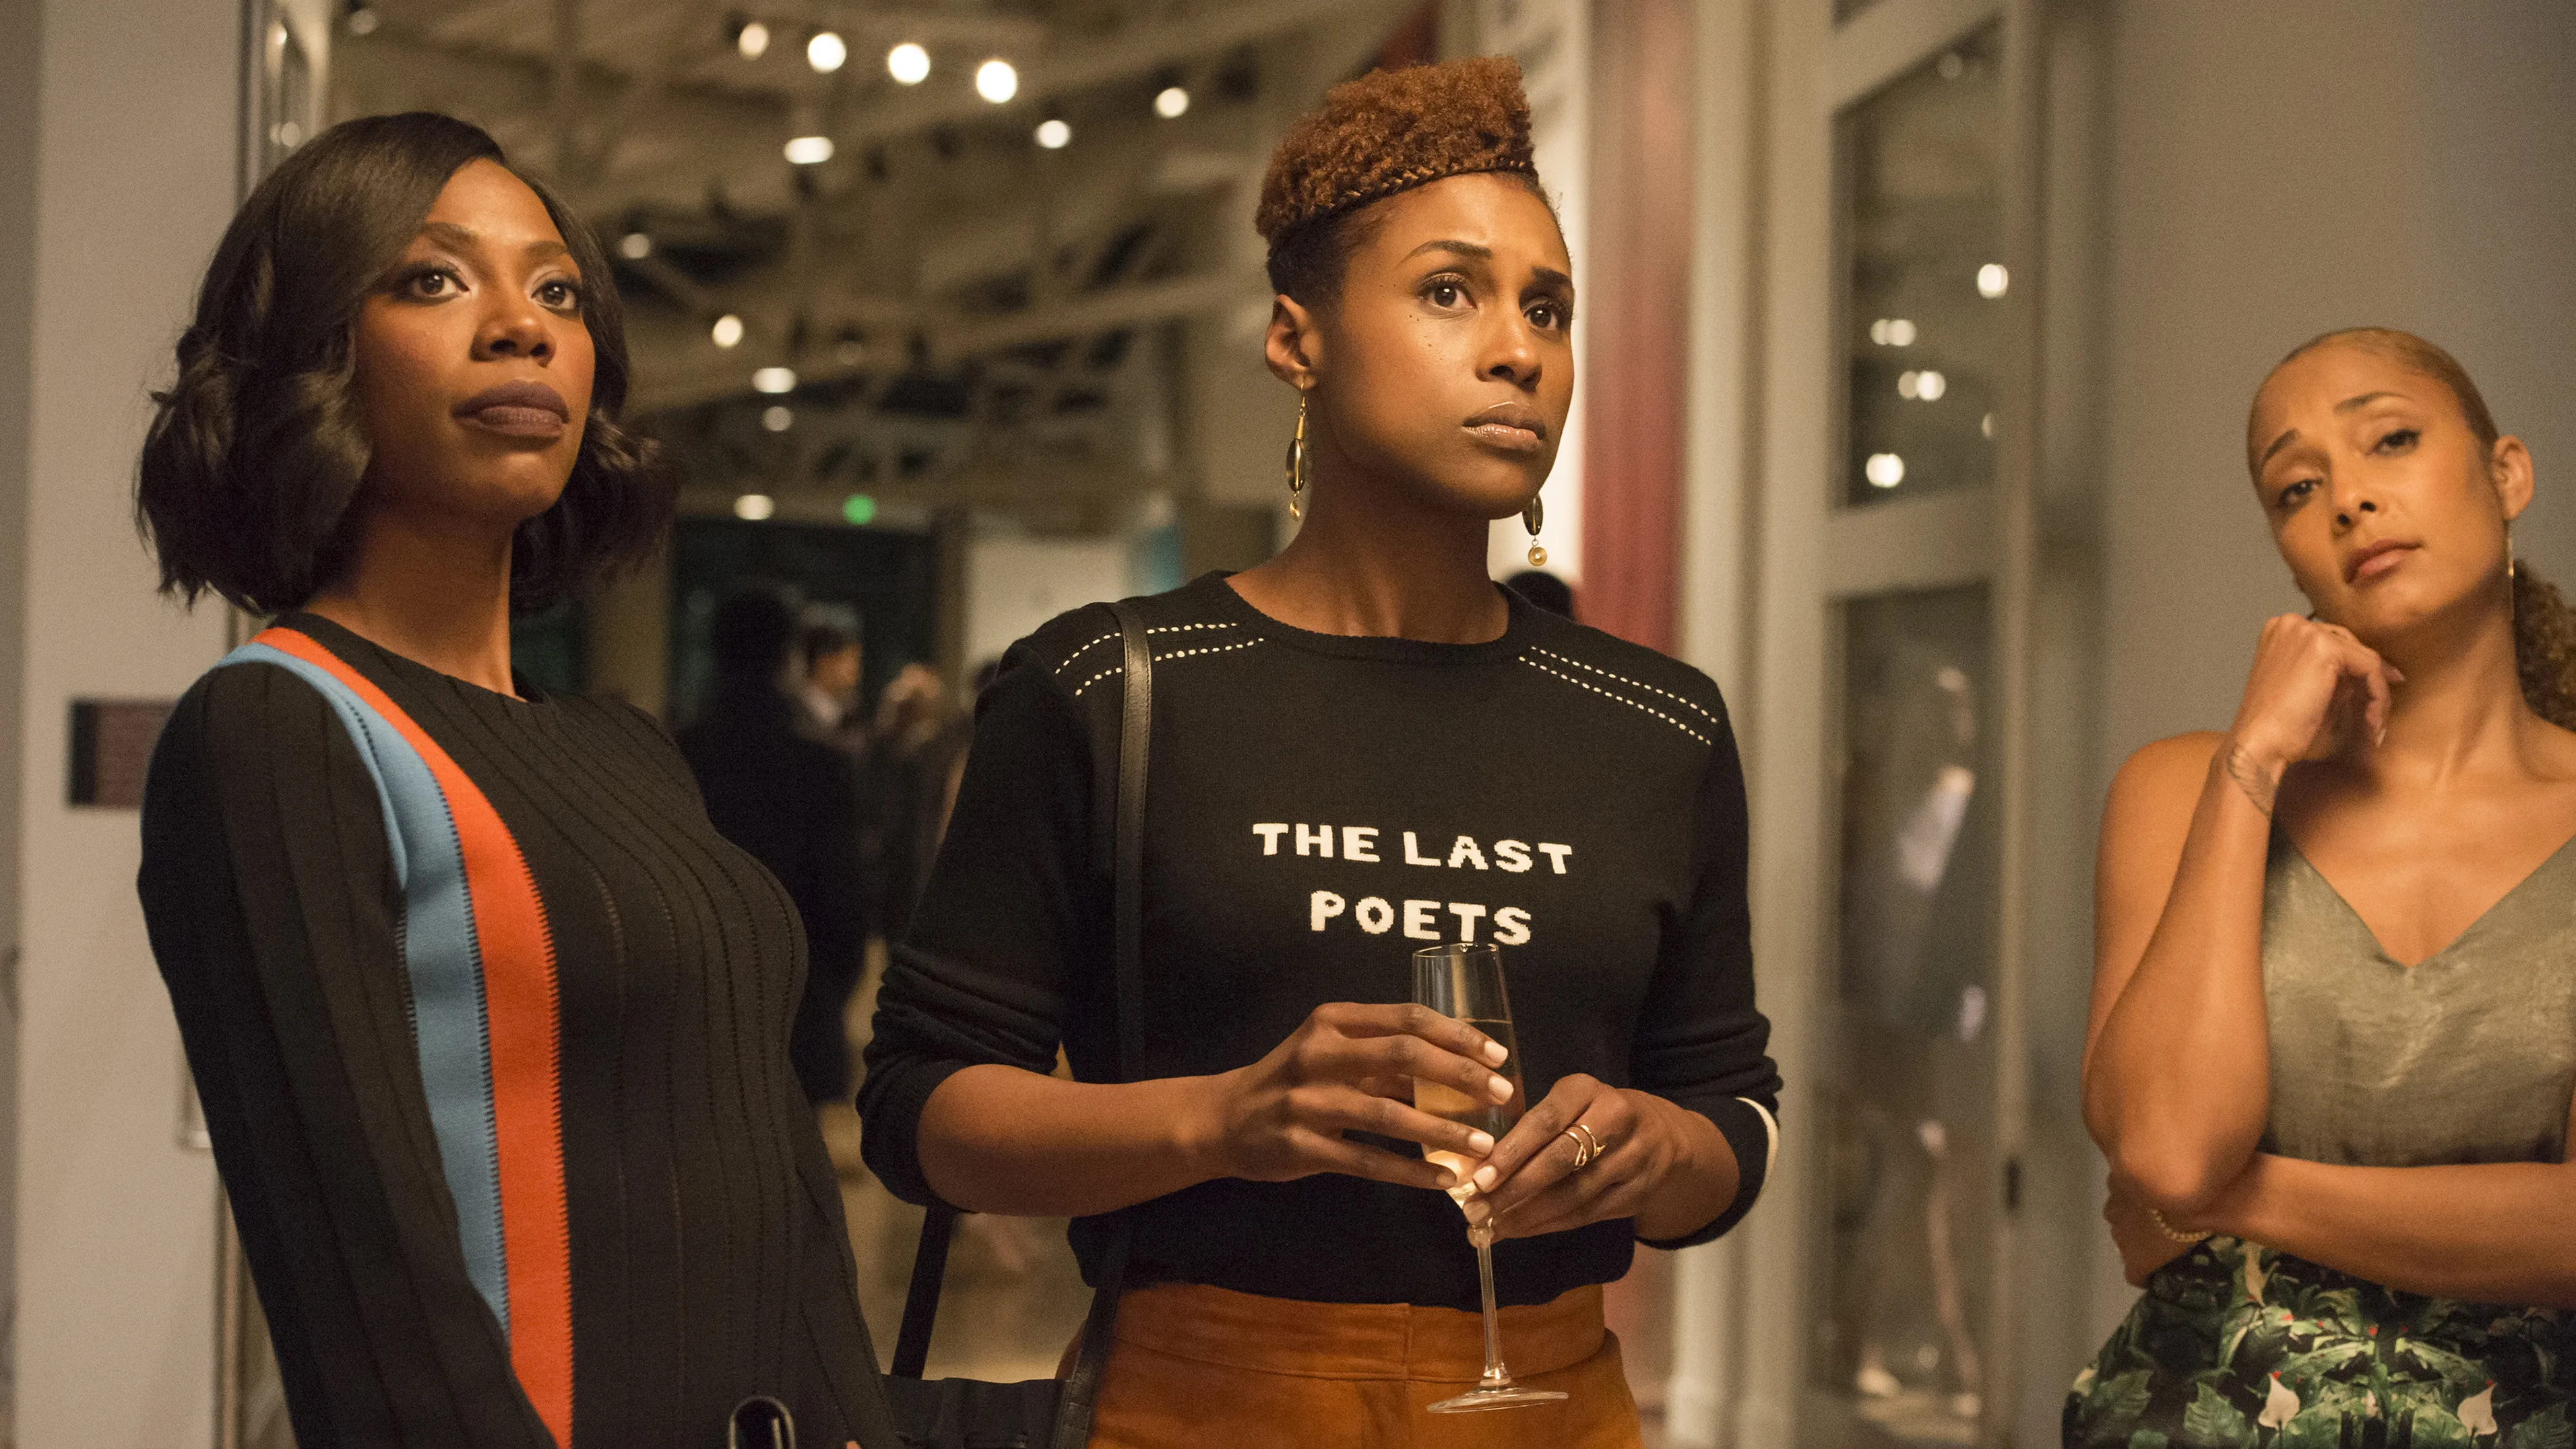 Insecure - TV Series